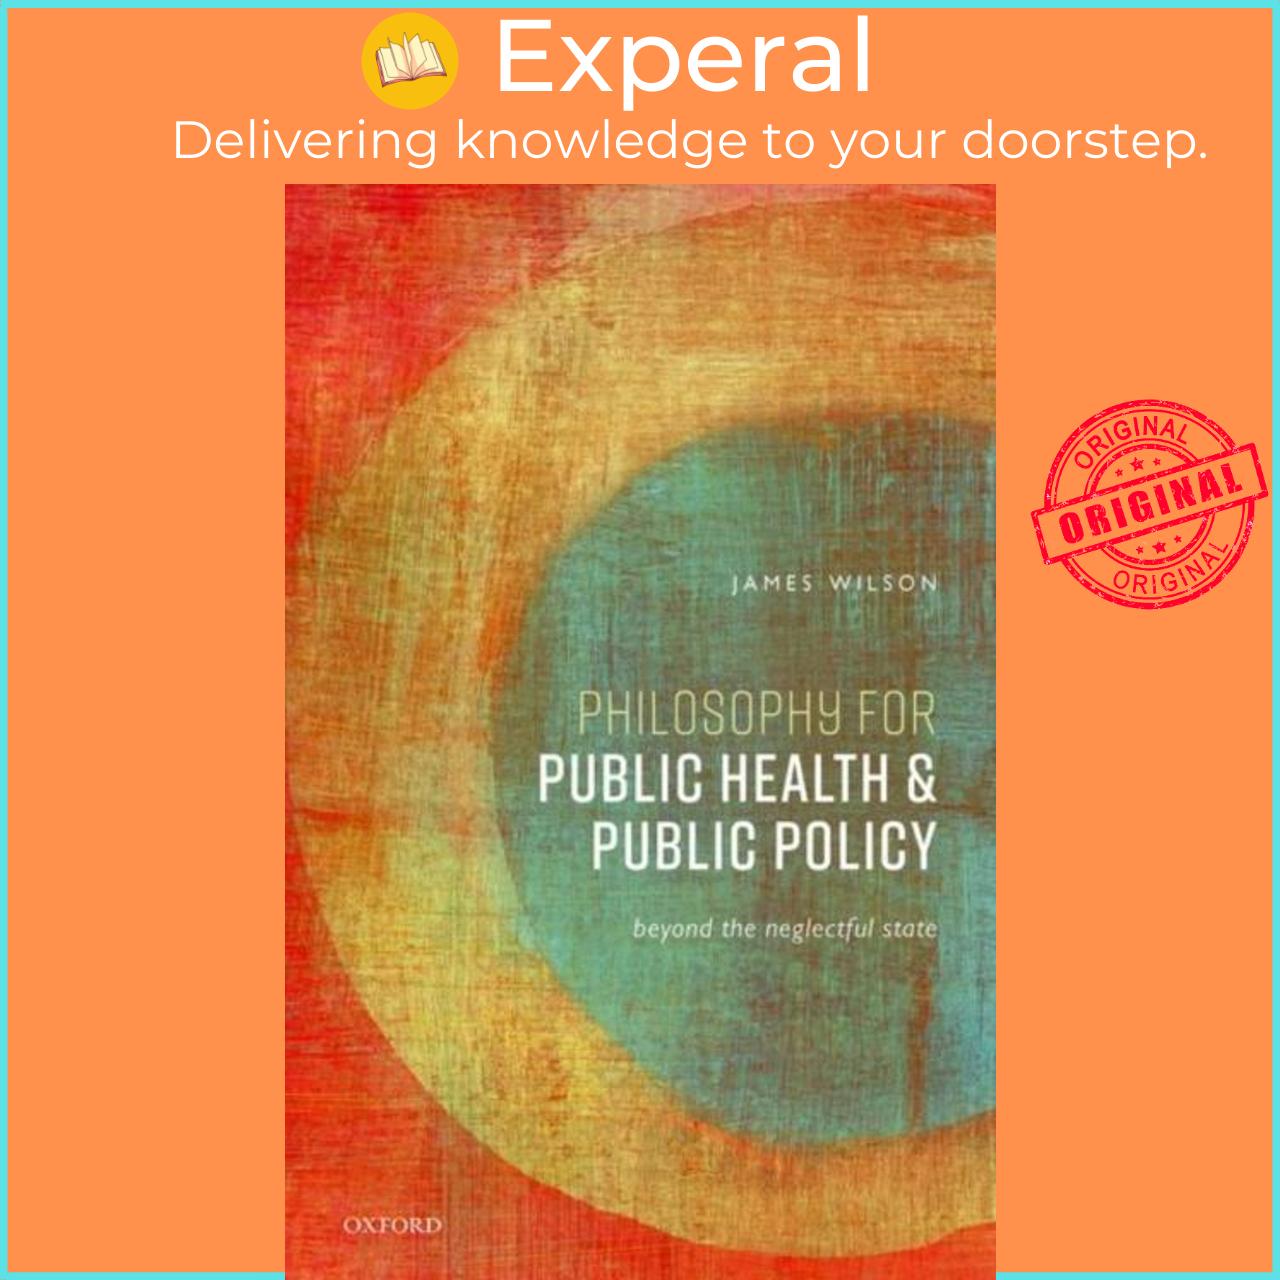 Sách - Philosophy for Public Health and Public Policy - Beyond the Neglectful St by James Wilson (UK edition, hardcover)